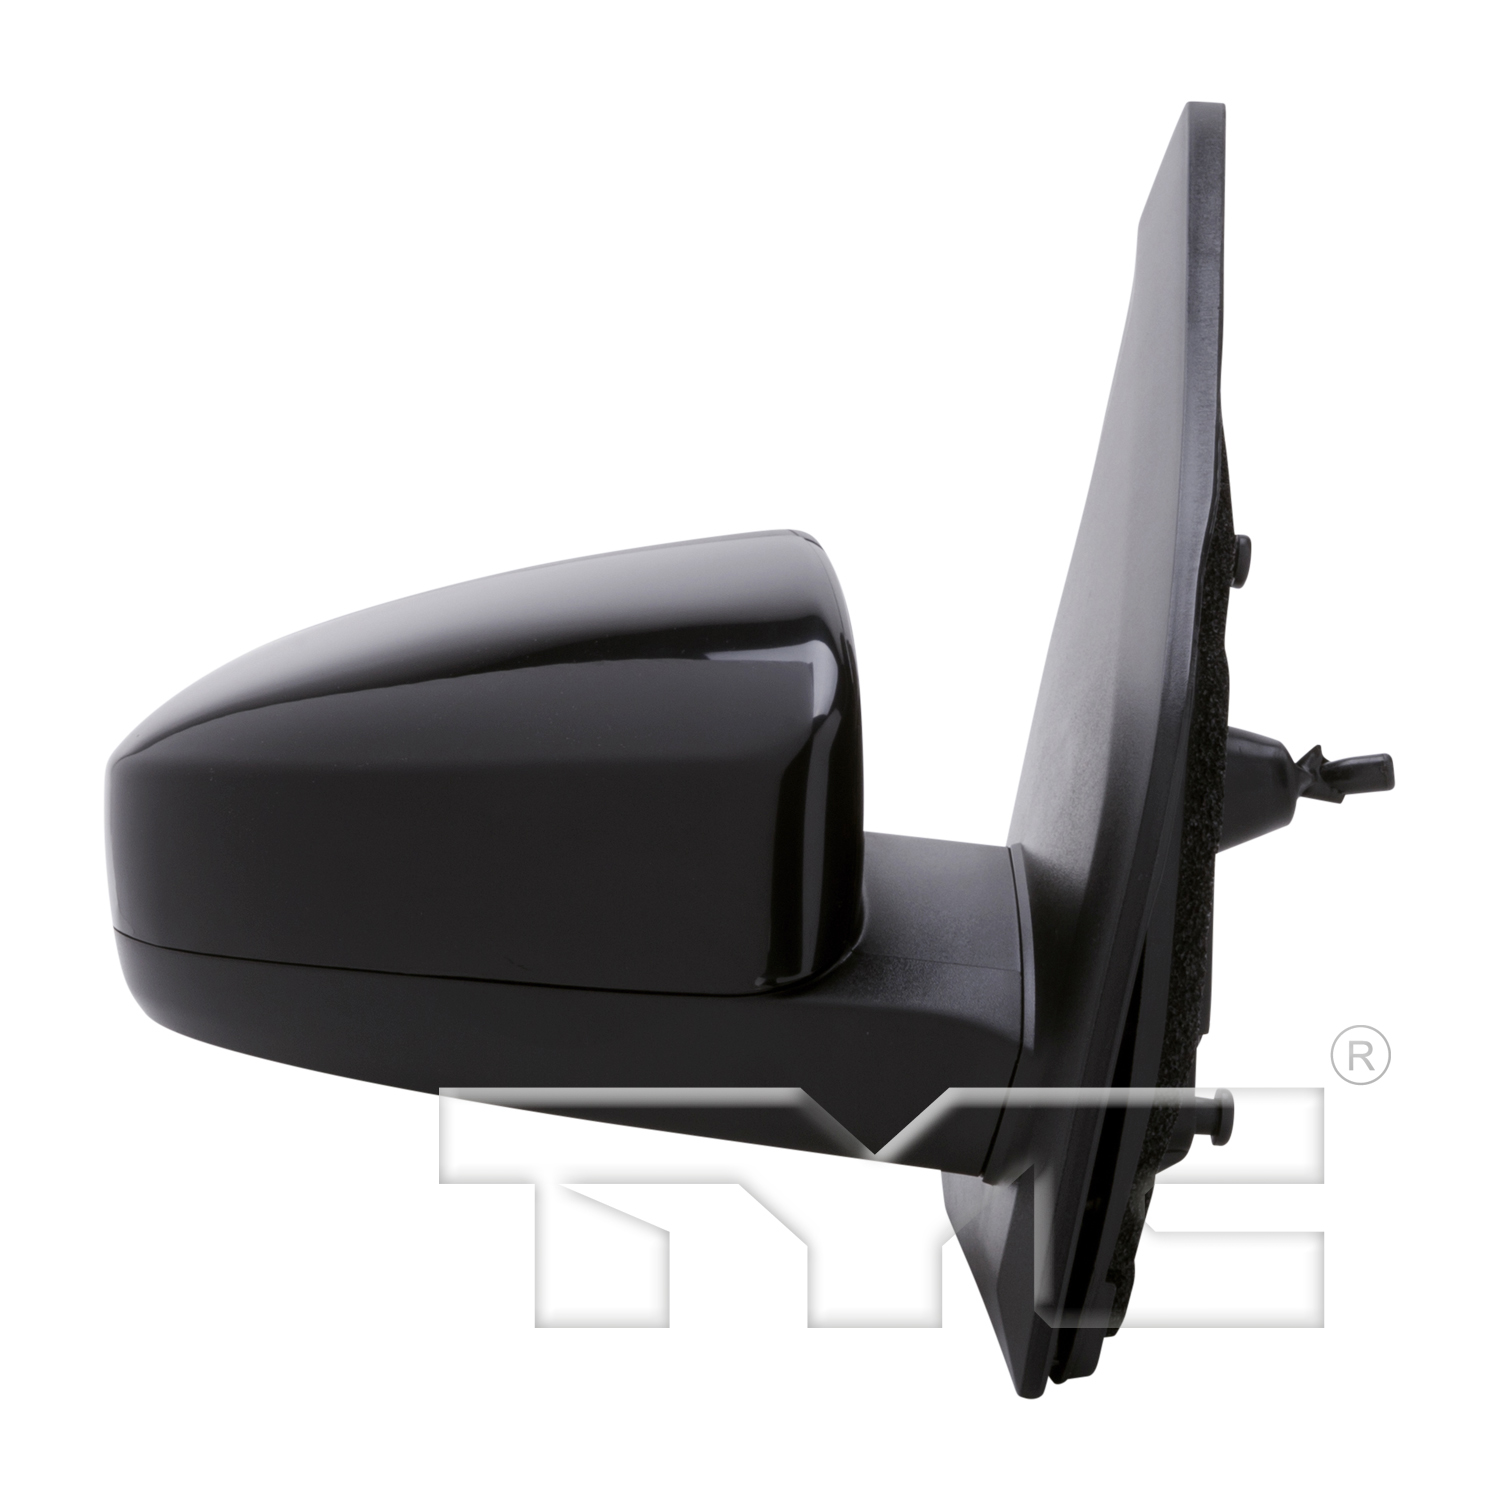 Aftermarket MIRRORS for NISSAN - SENTRA, SENTRA,07-12,RT Mirror outside rear view